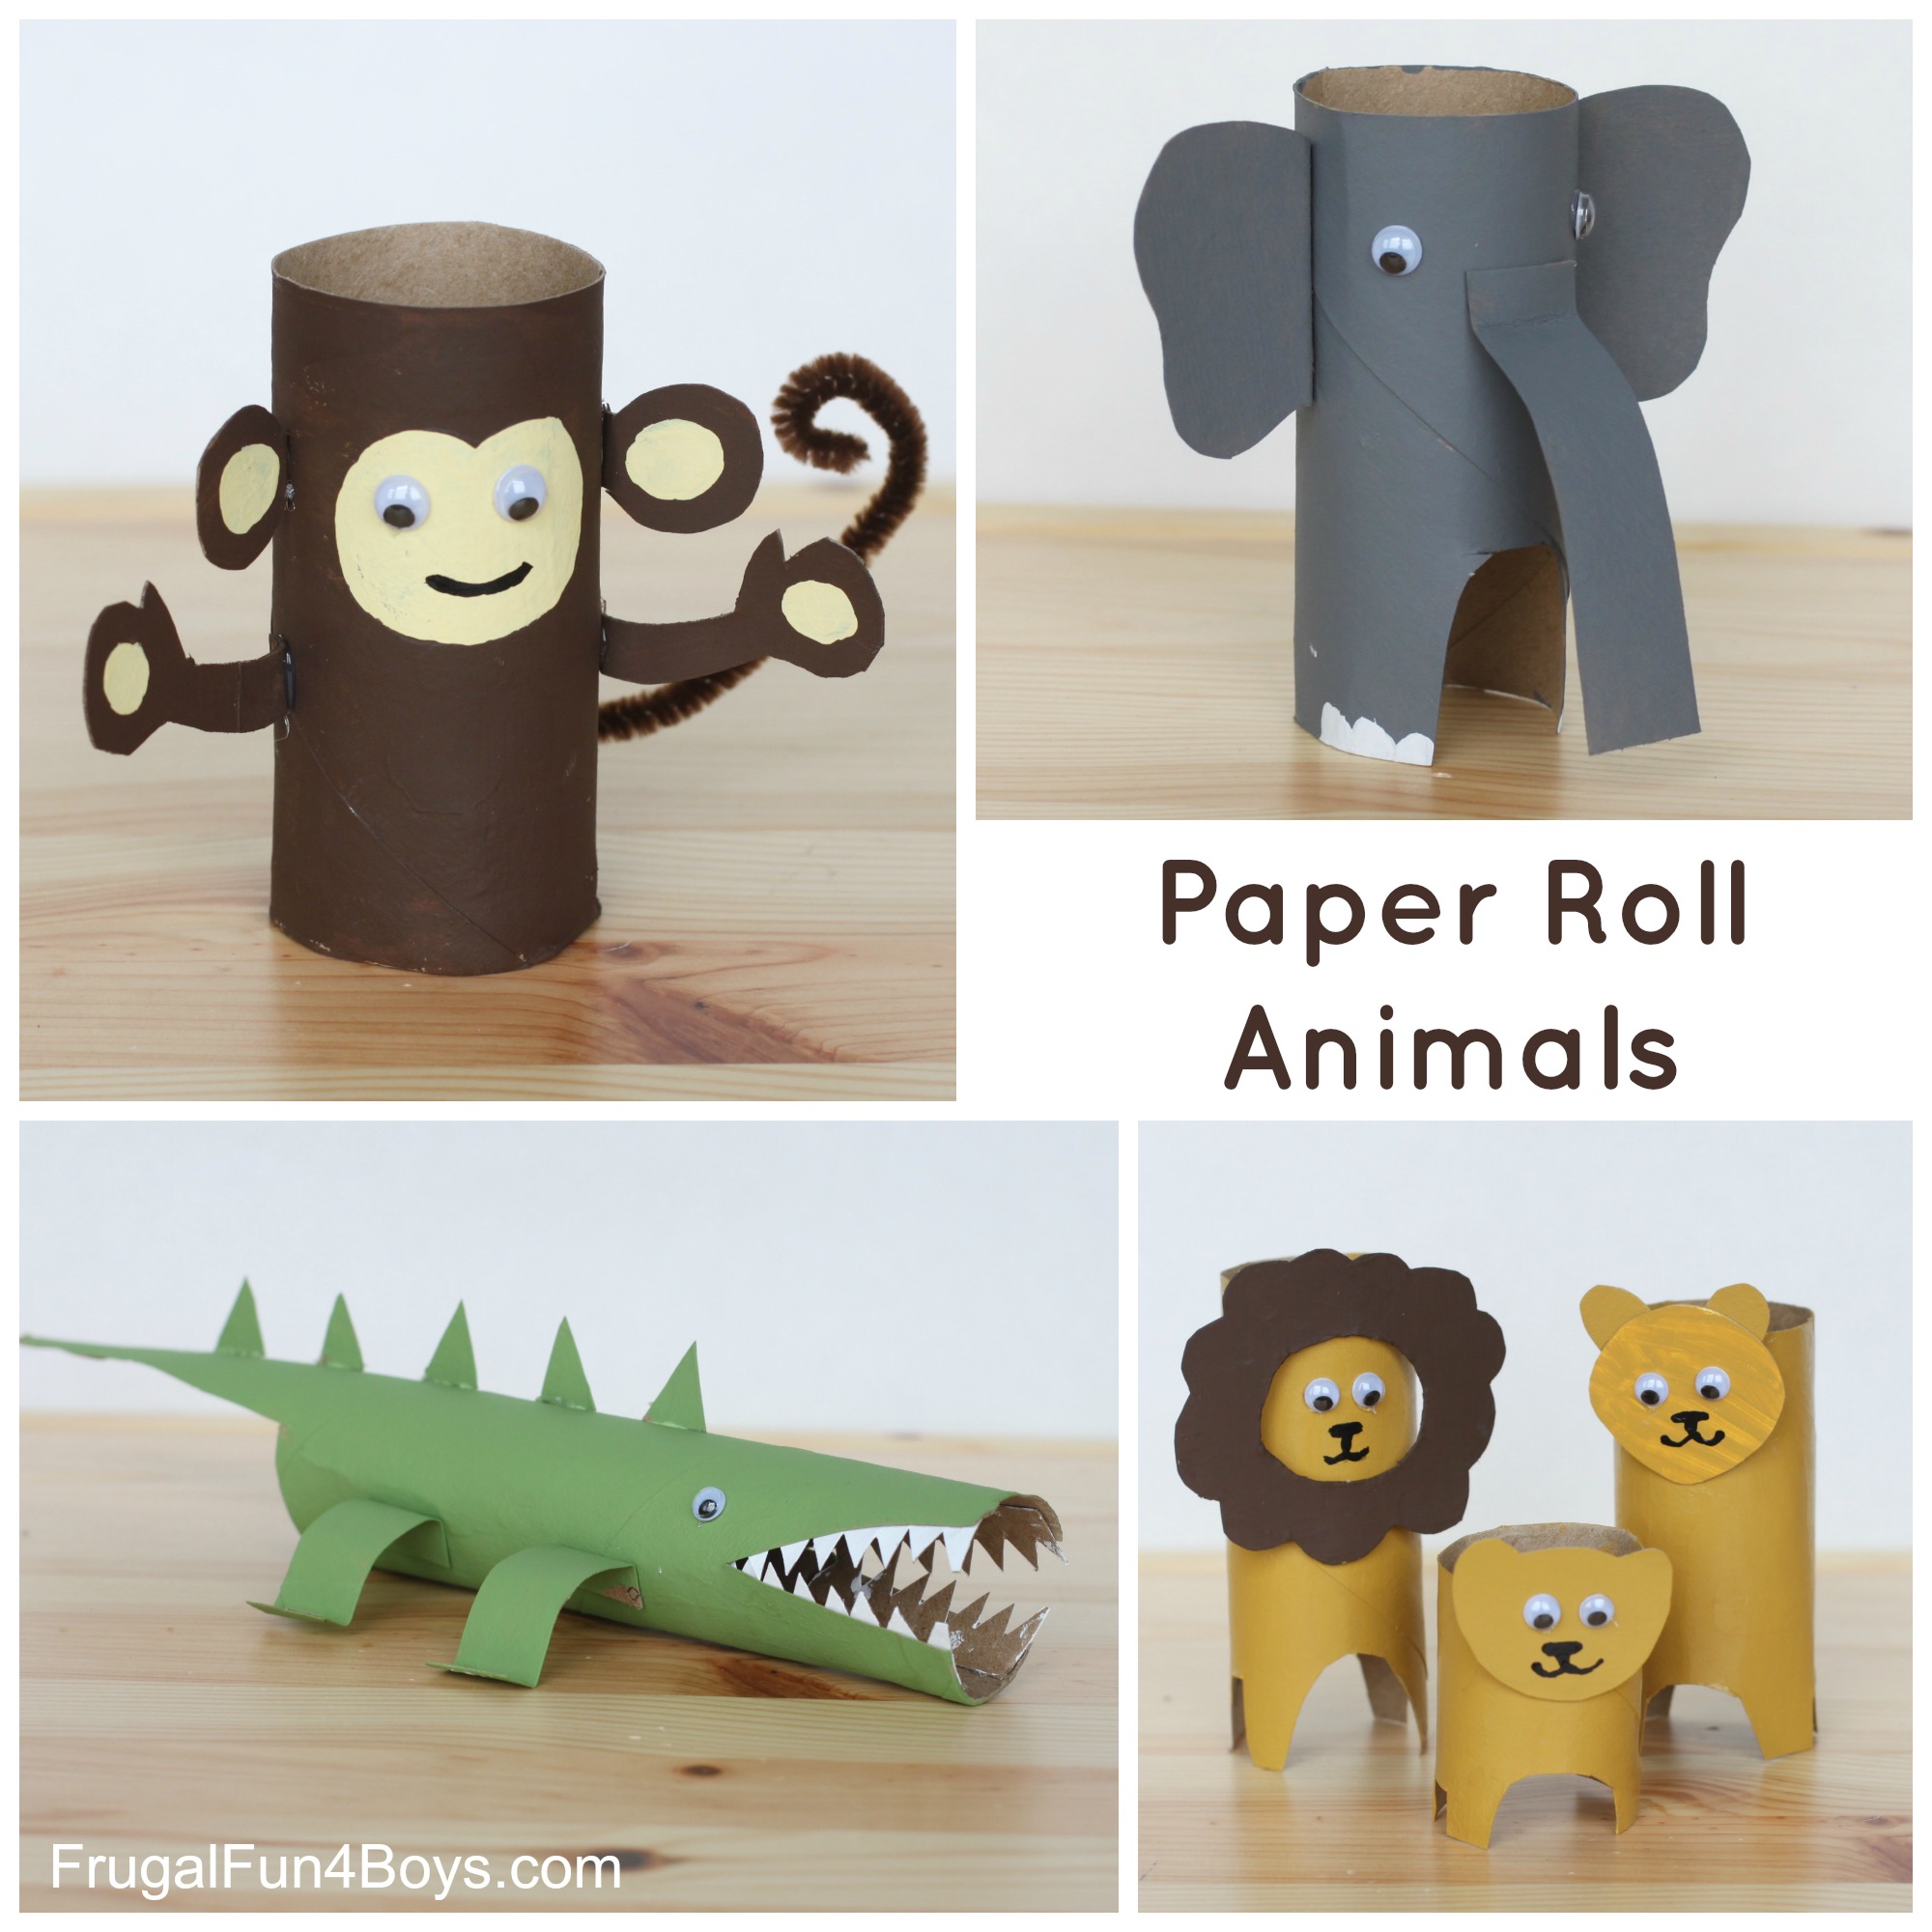 Paper Roll Animals to Make